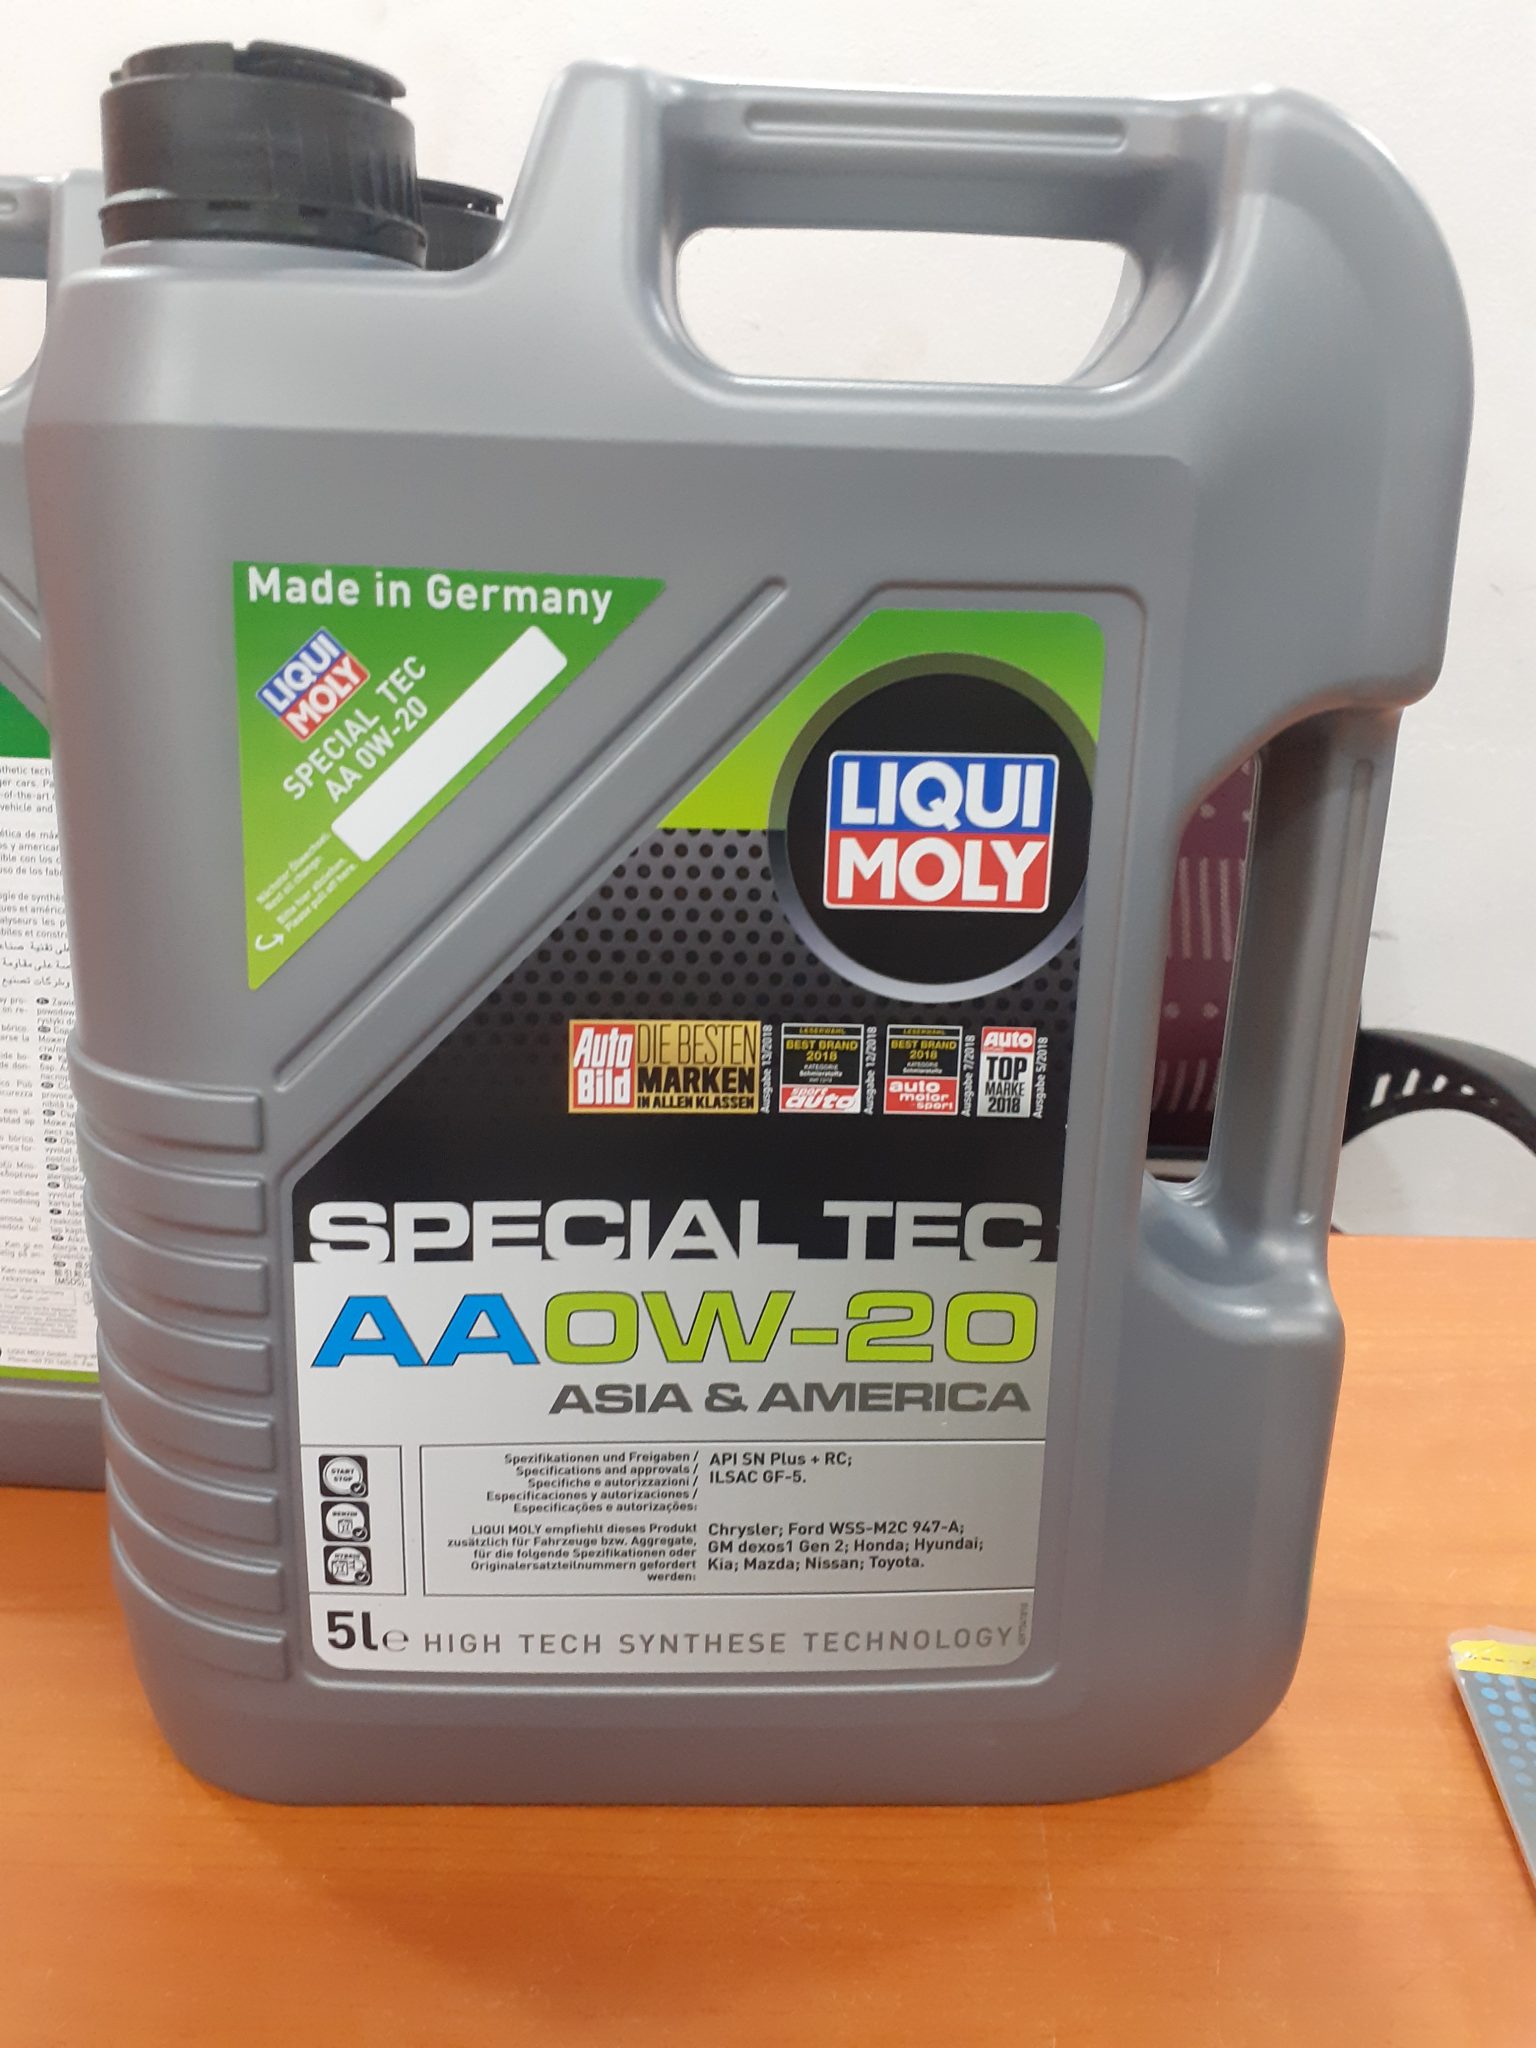 LIQUI MOLY Special Tec AA SAE 0W-20 | 5 L | Synthesis technology motor oil  | SKU: 2208